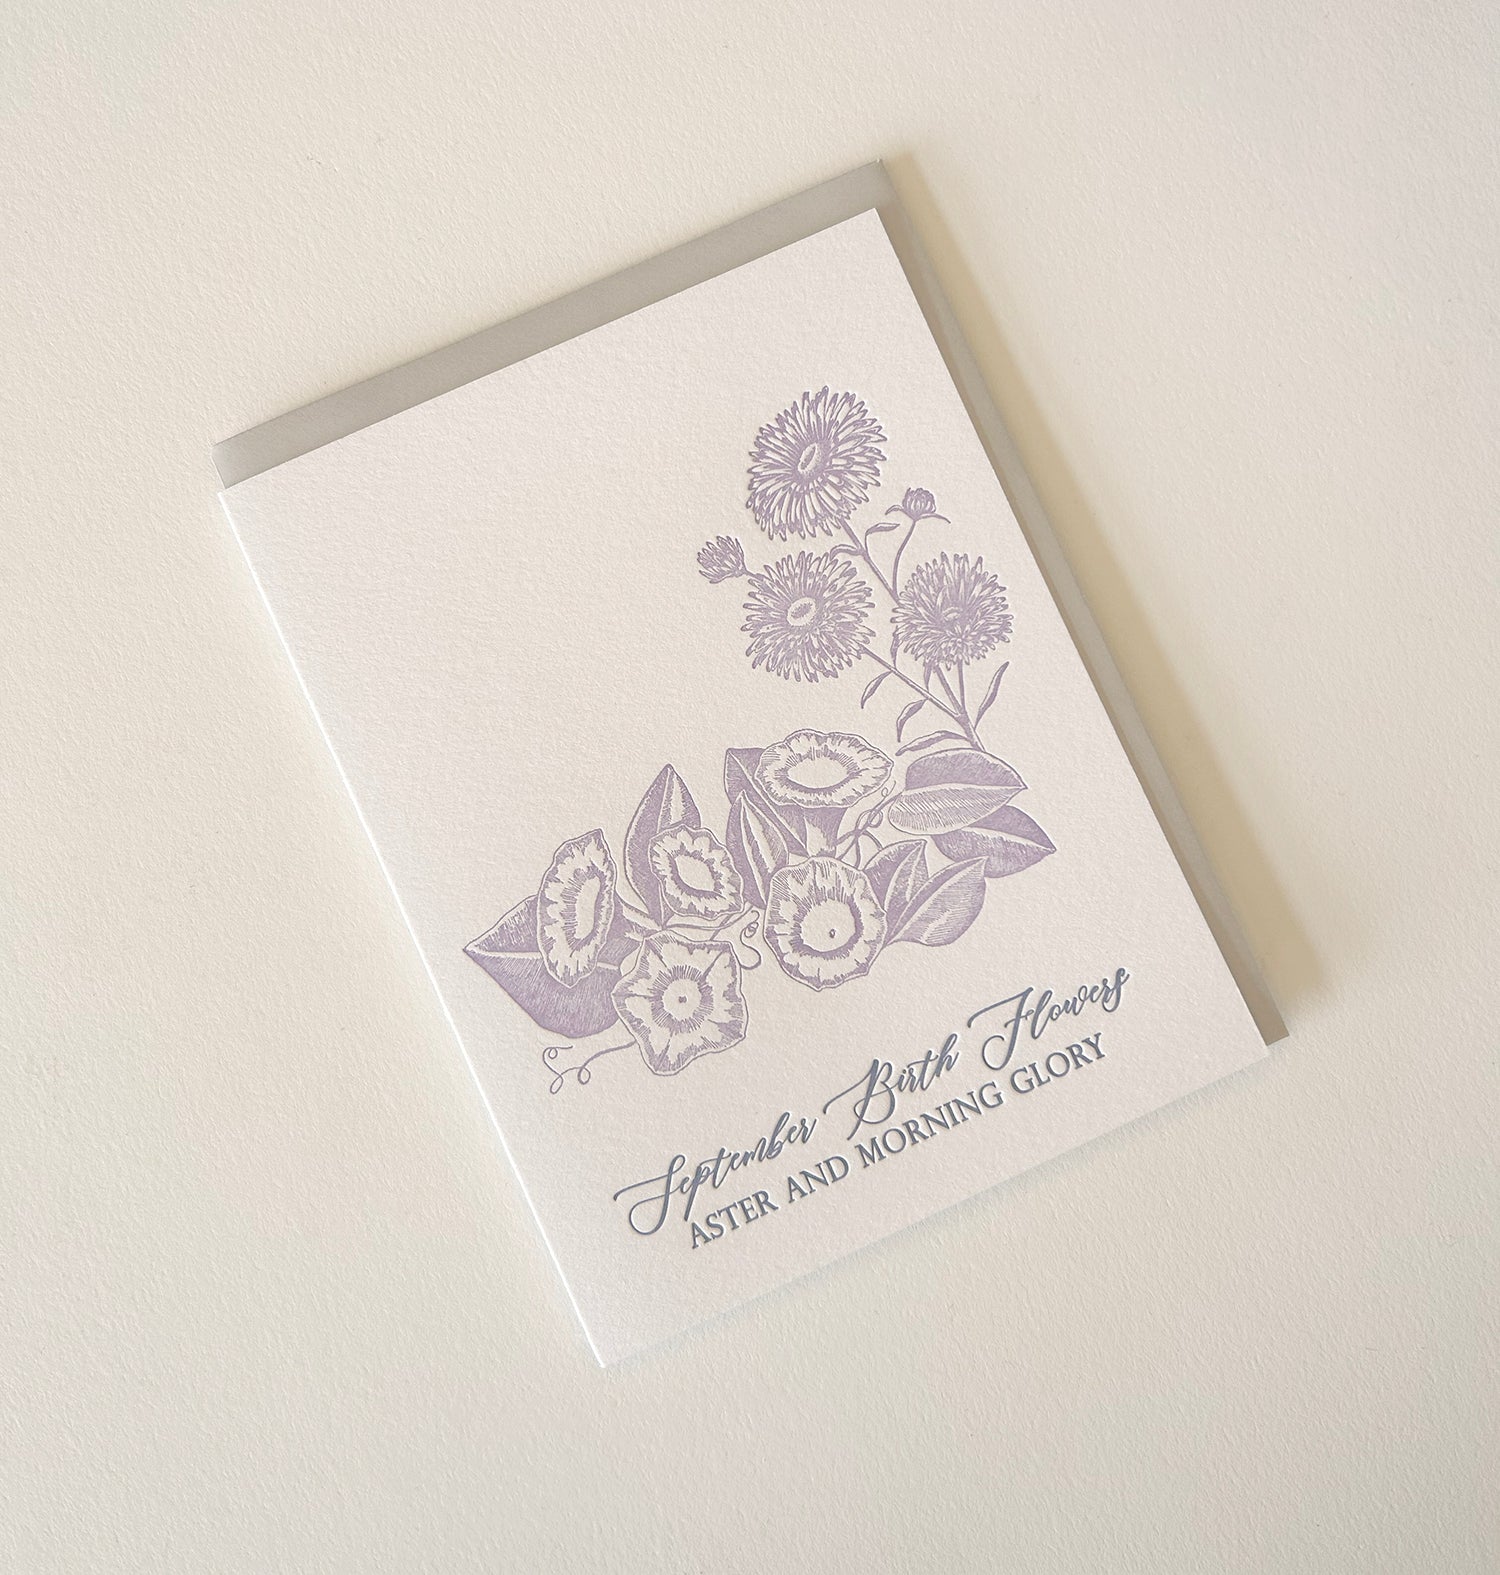 Letterpress birthday card with florals that says "Septmeber birth flowers aster and morning glory" by Rust Belt Love